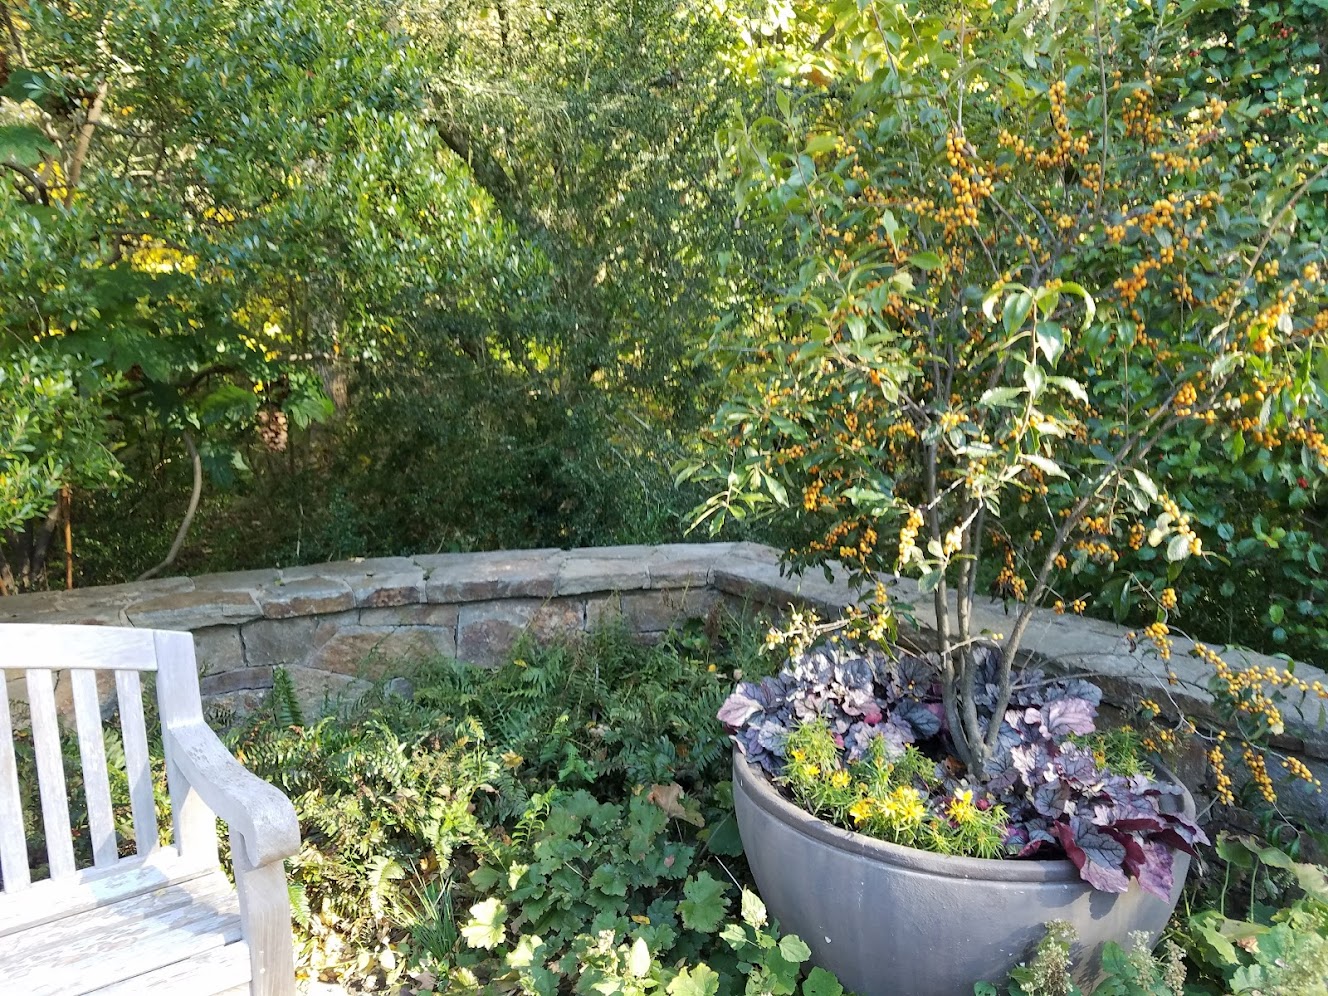 large pot containing multiple plants sits next to a wooden bench and stone wall